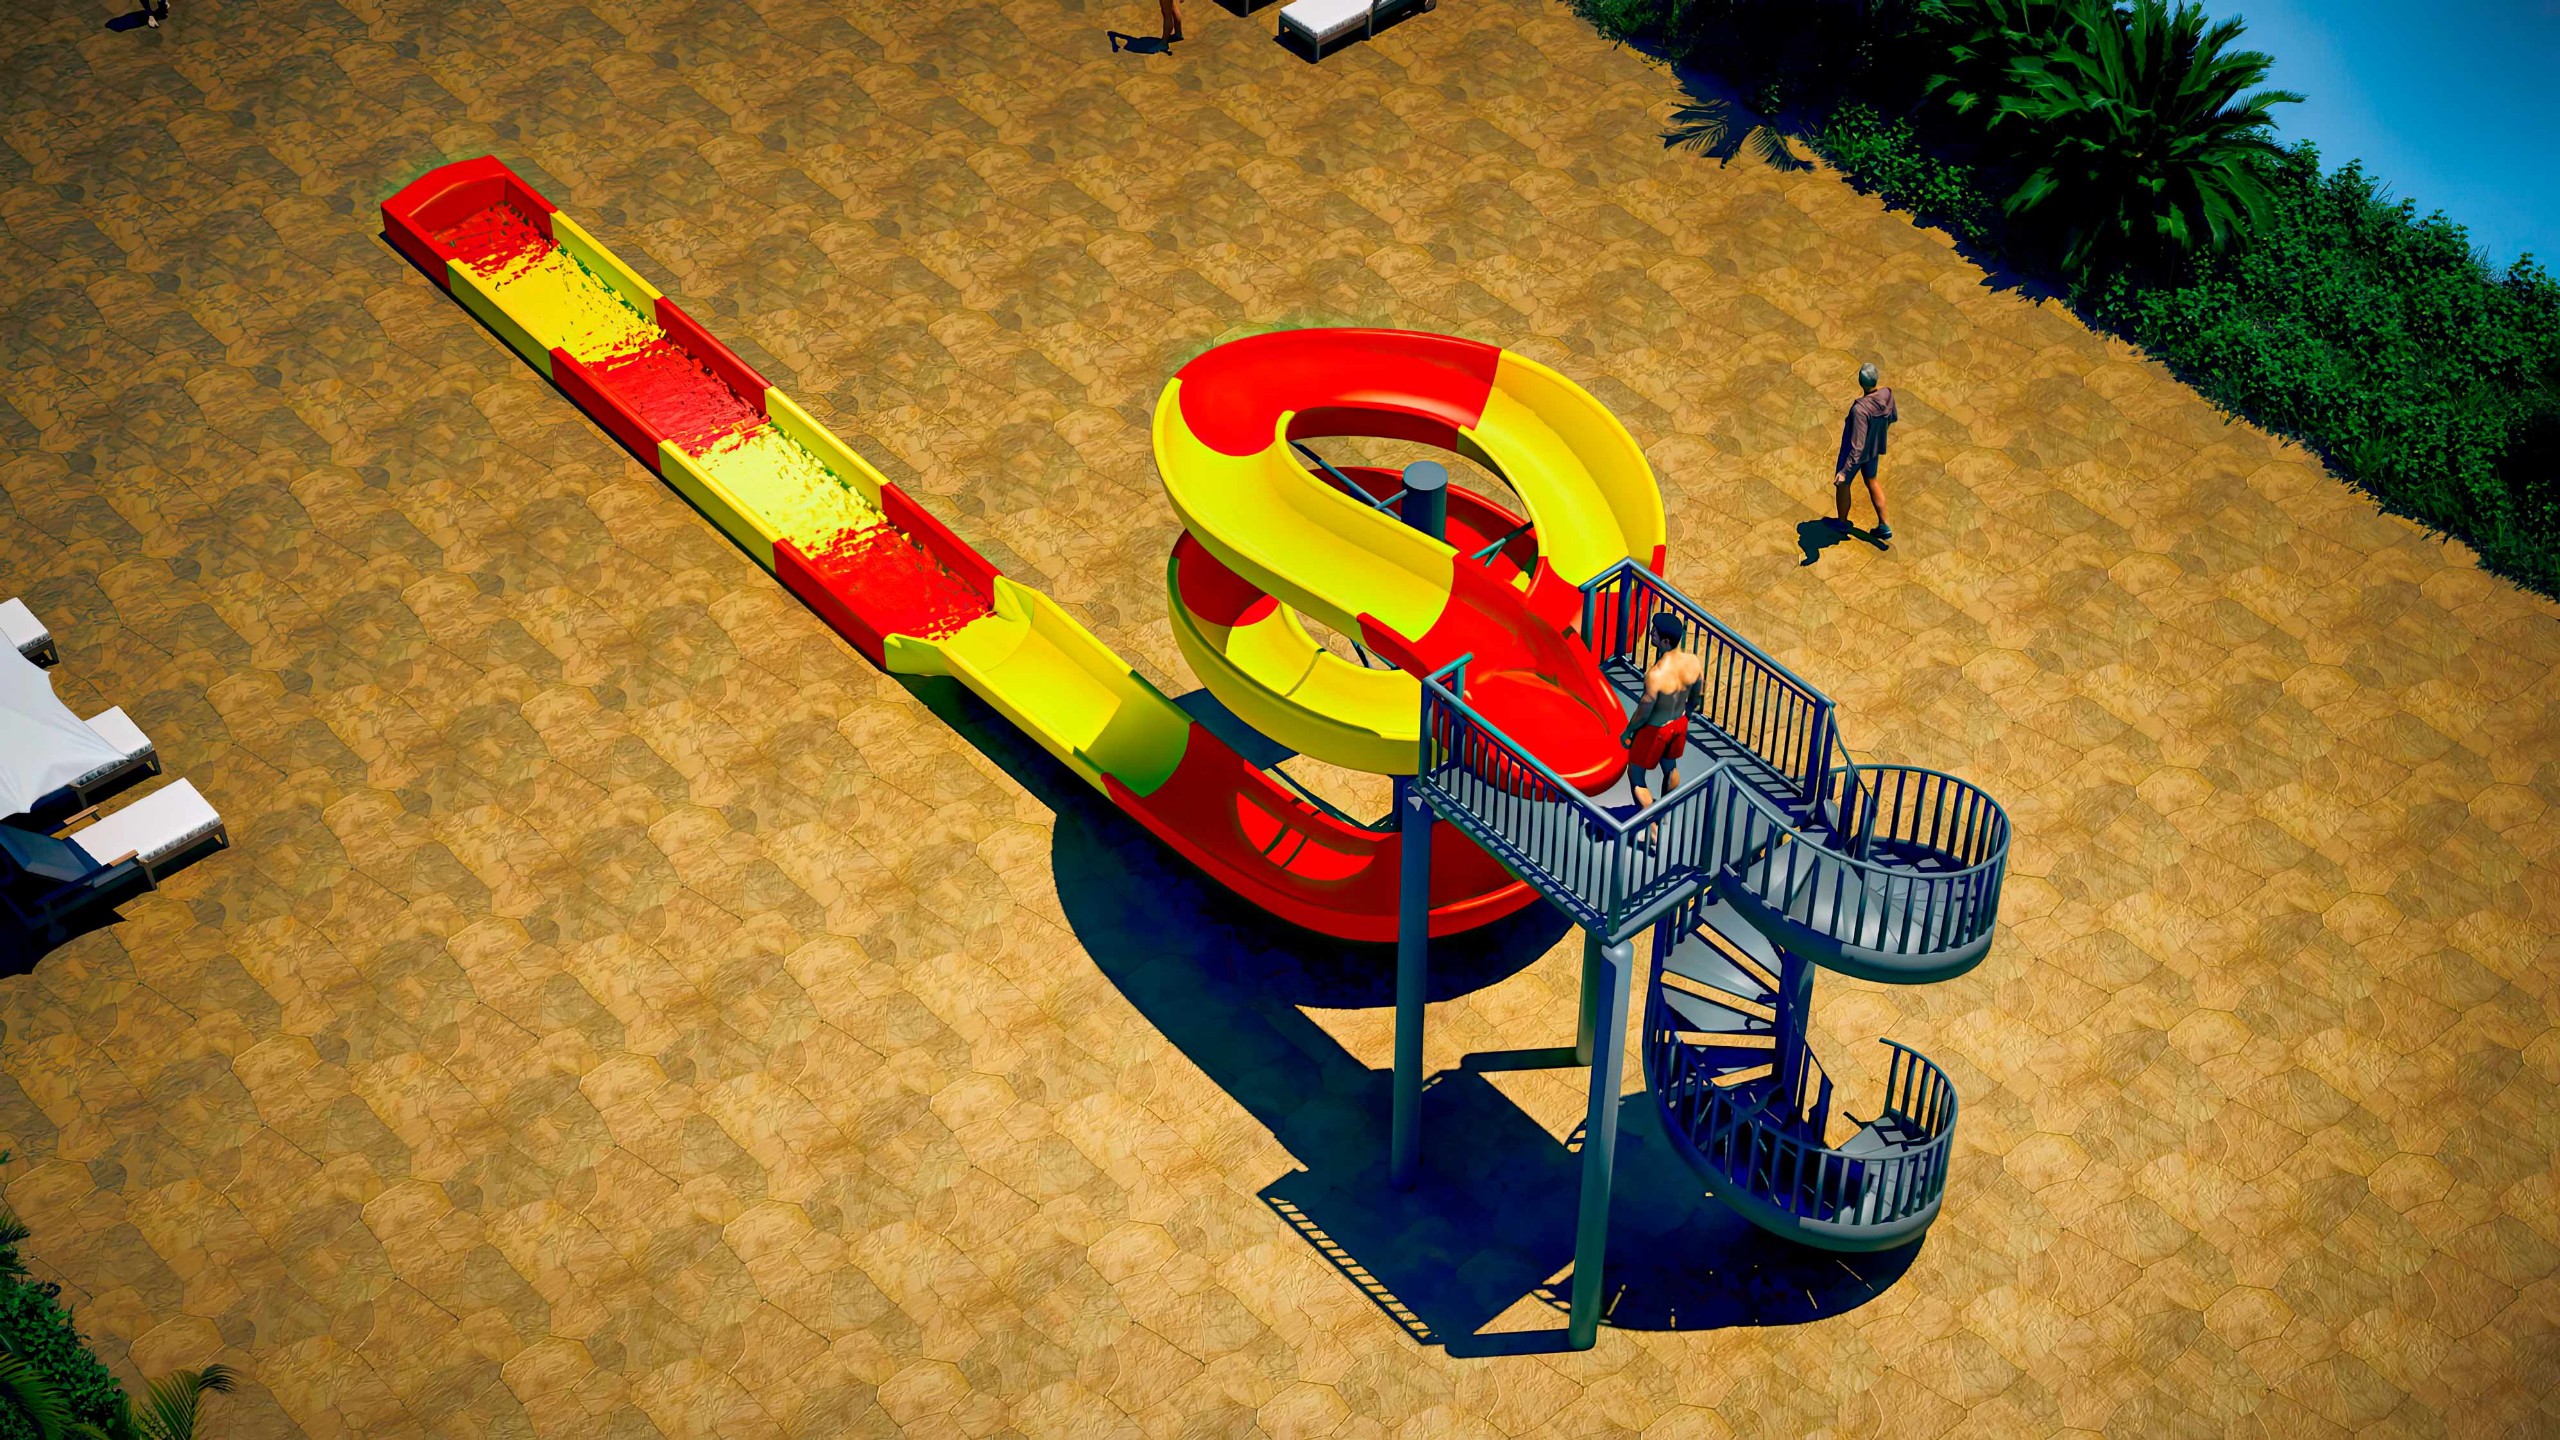 Water park layout Design COMPANY